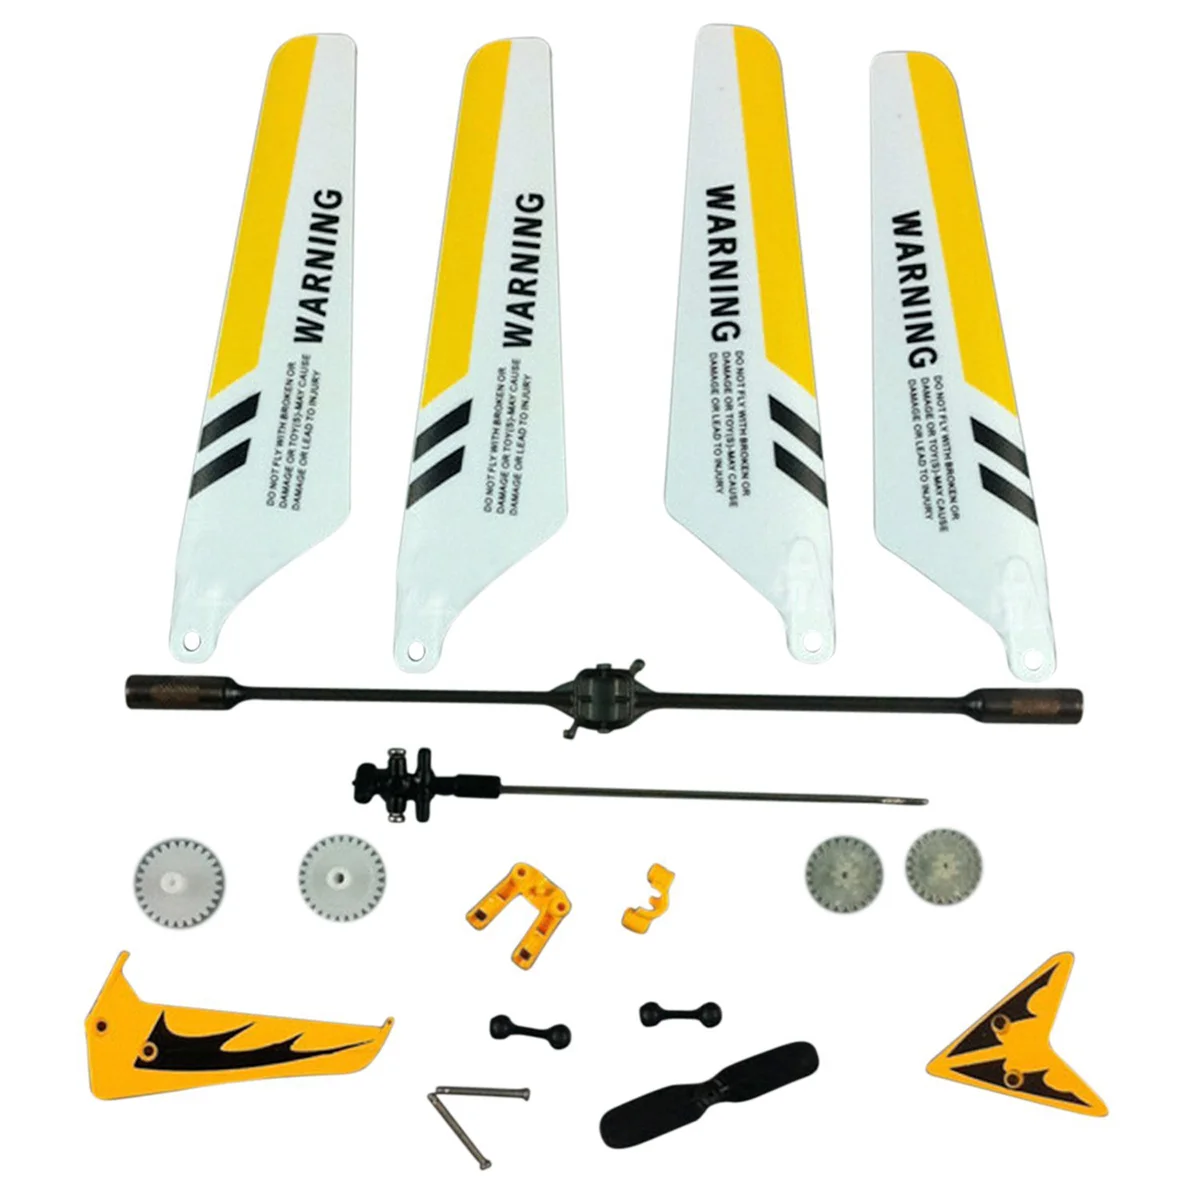  Spare Replacement S107G Rc Set Tail Helicopter Full S107 Main Decoratio... - $4.05